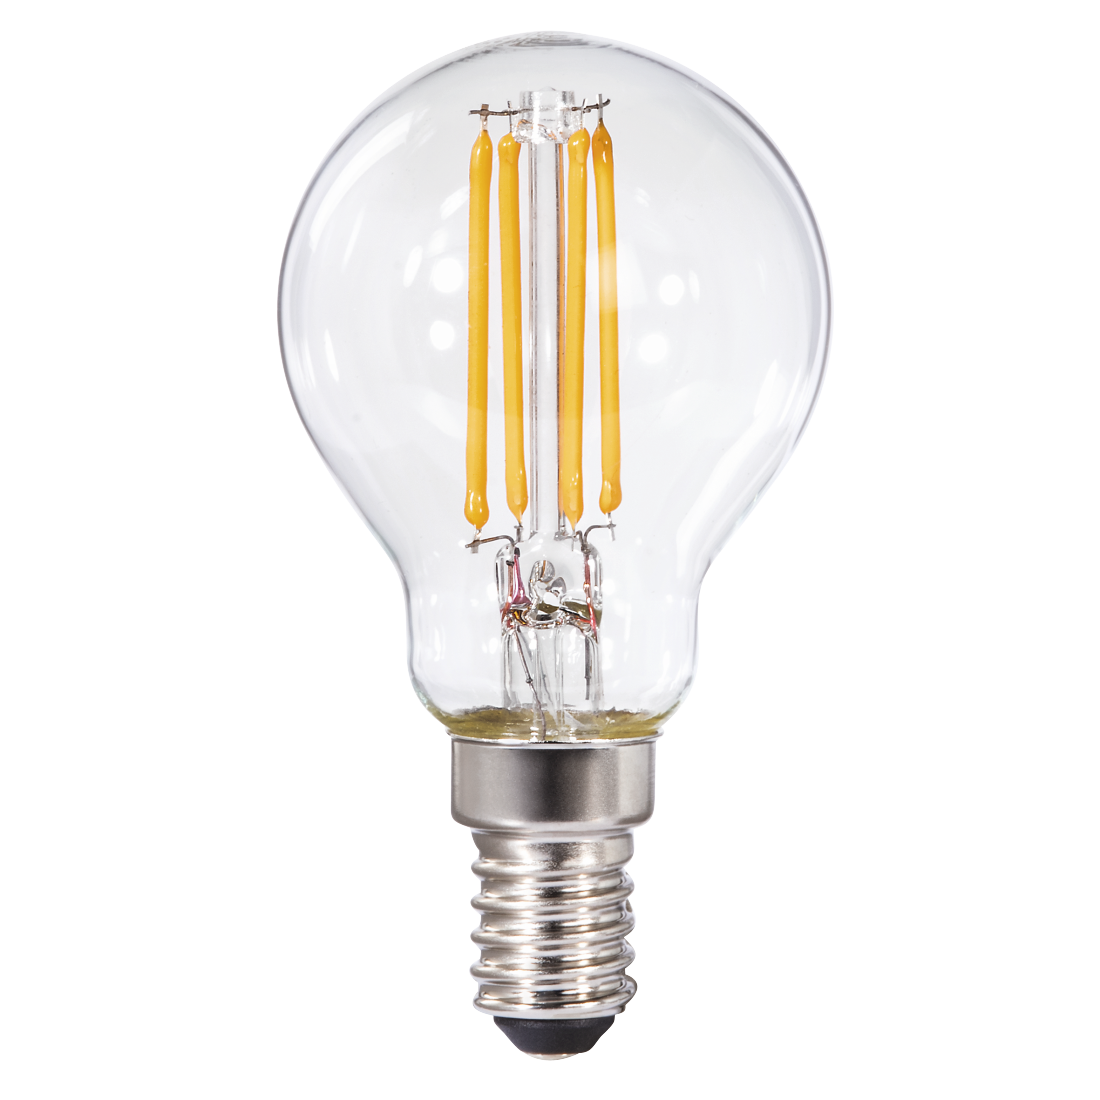 abx High-Res Image - Xavax, LED Filament, E14, 470lm Replaces 40W, Drop Bulb, warm white, Dimmable